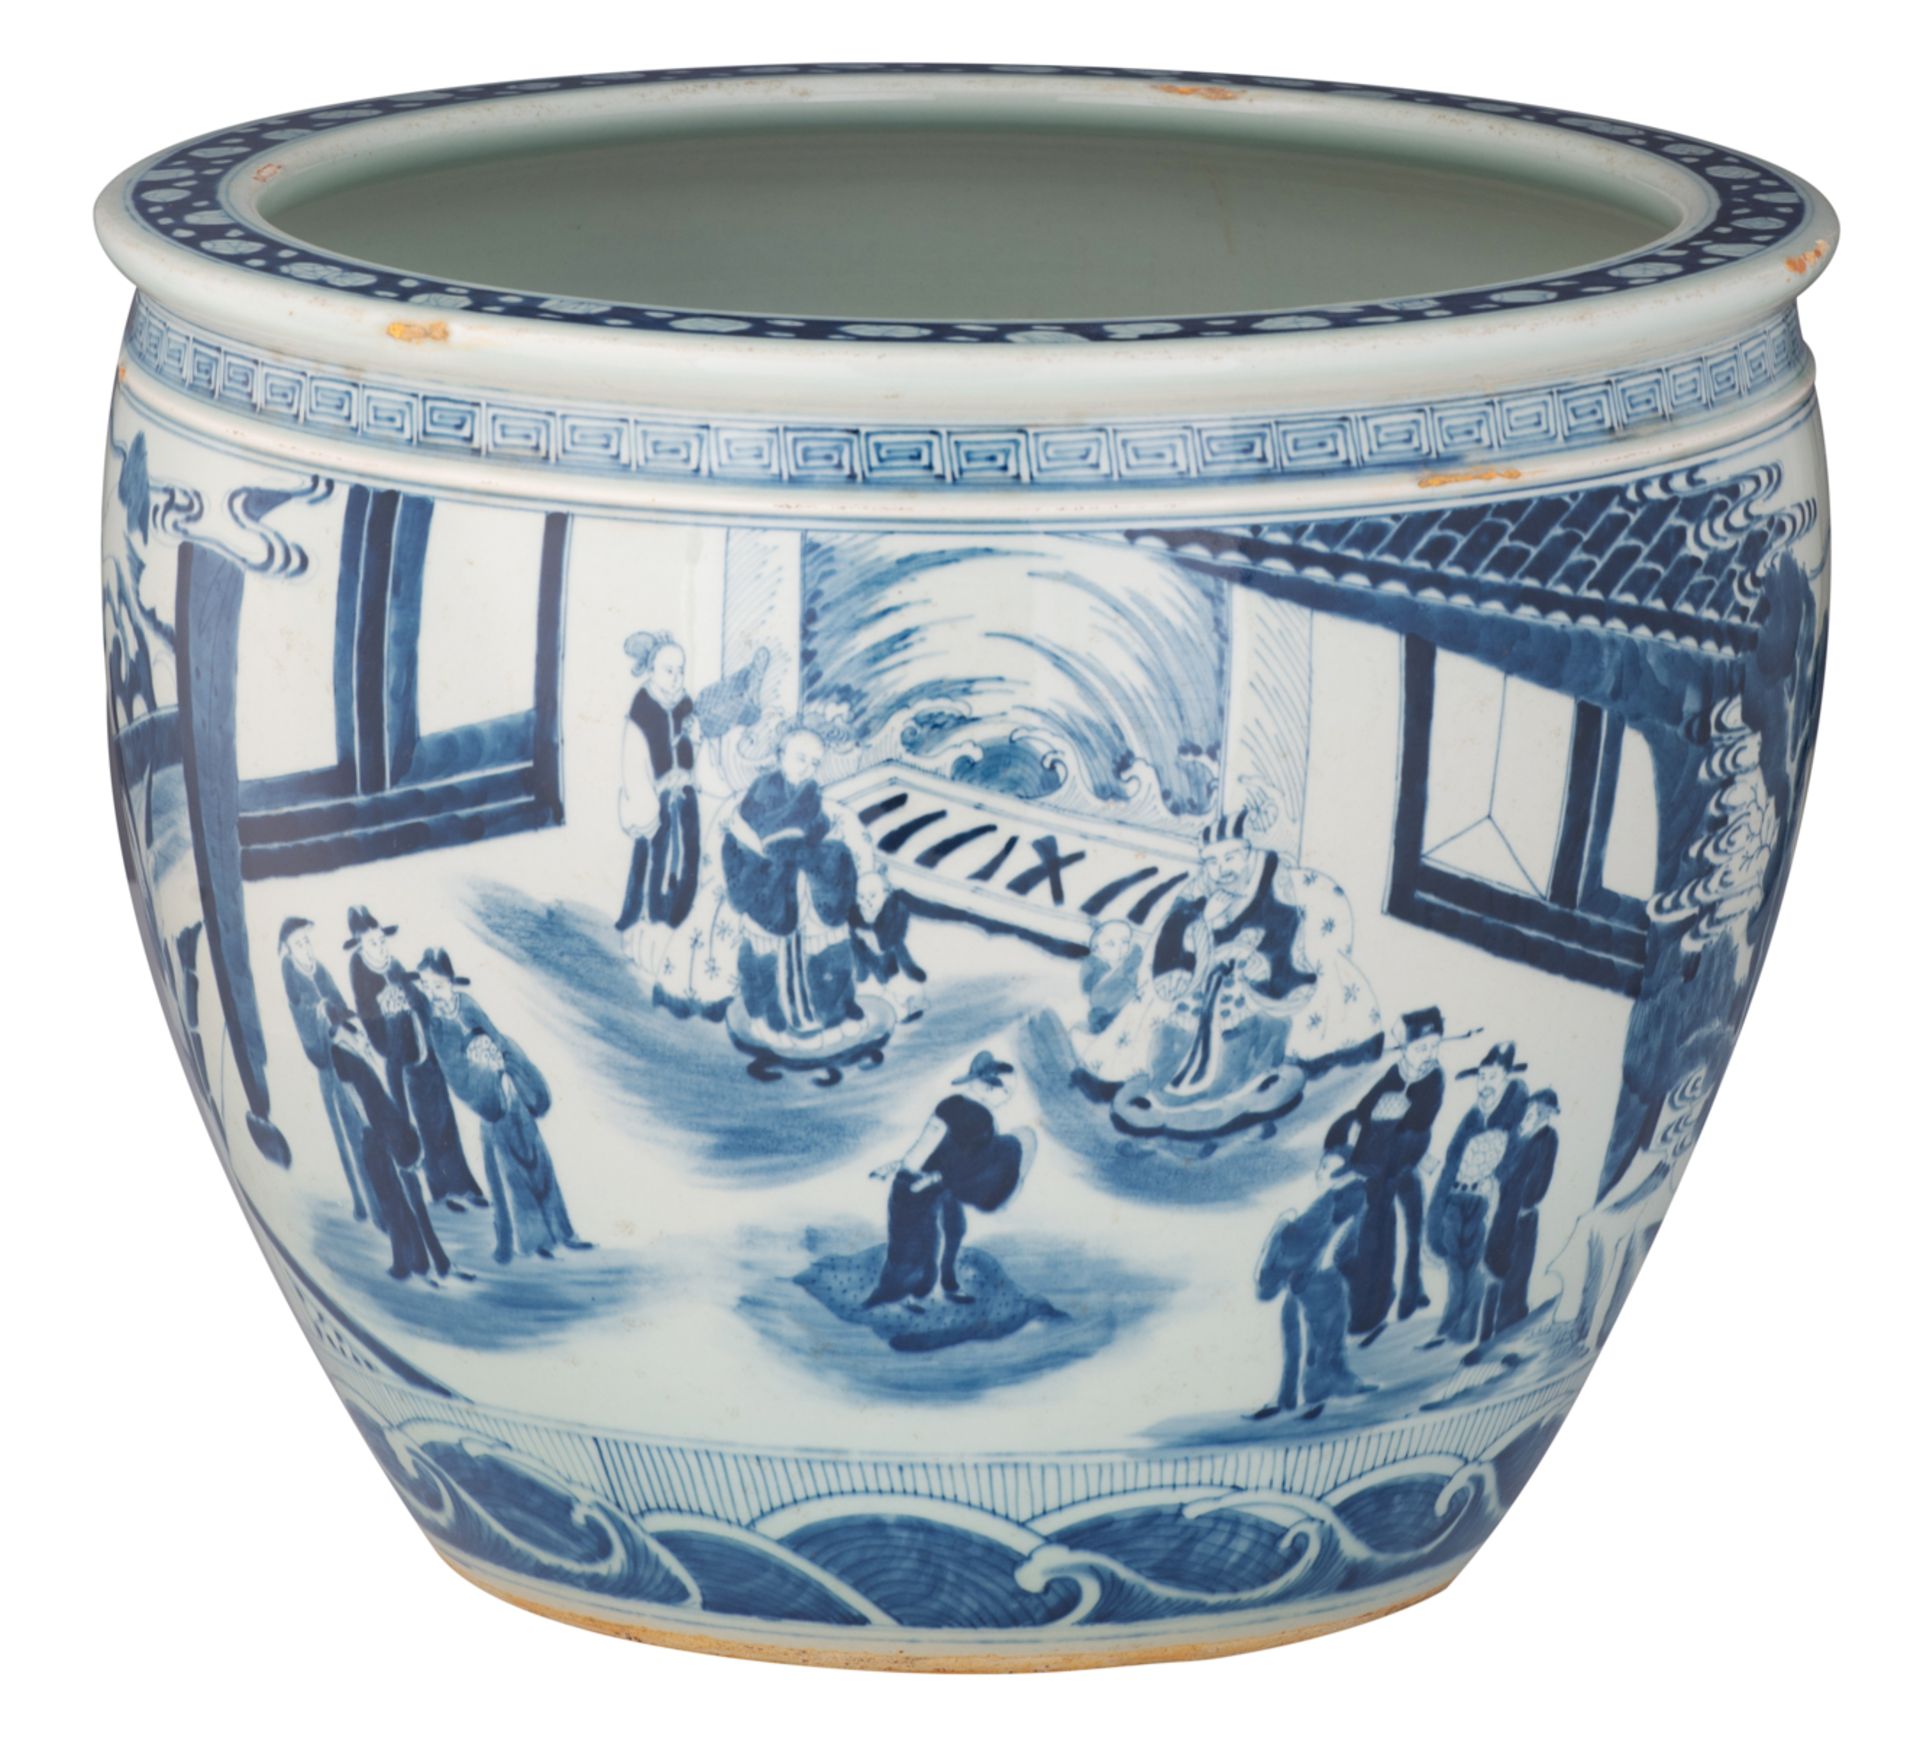 A Chinese blue and white jardiniere, decorated with daily life scenes, H 33 - ø 41,5 cm